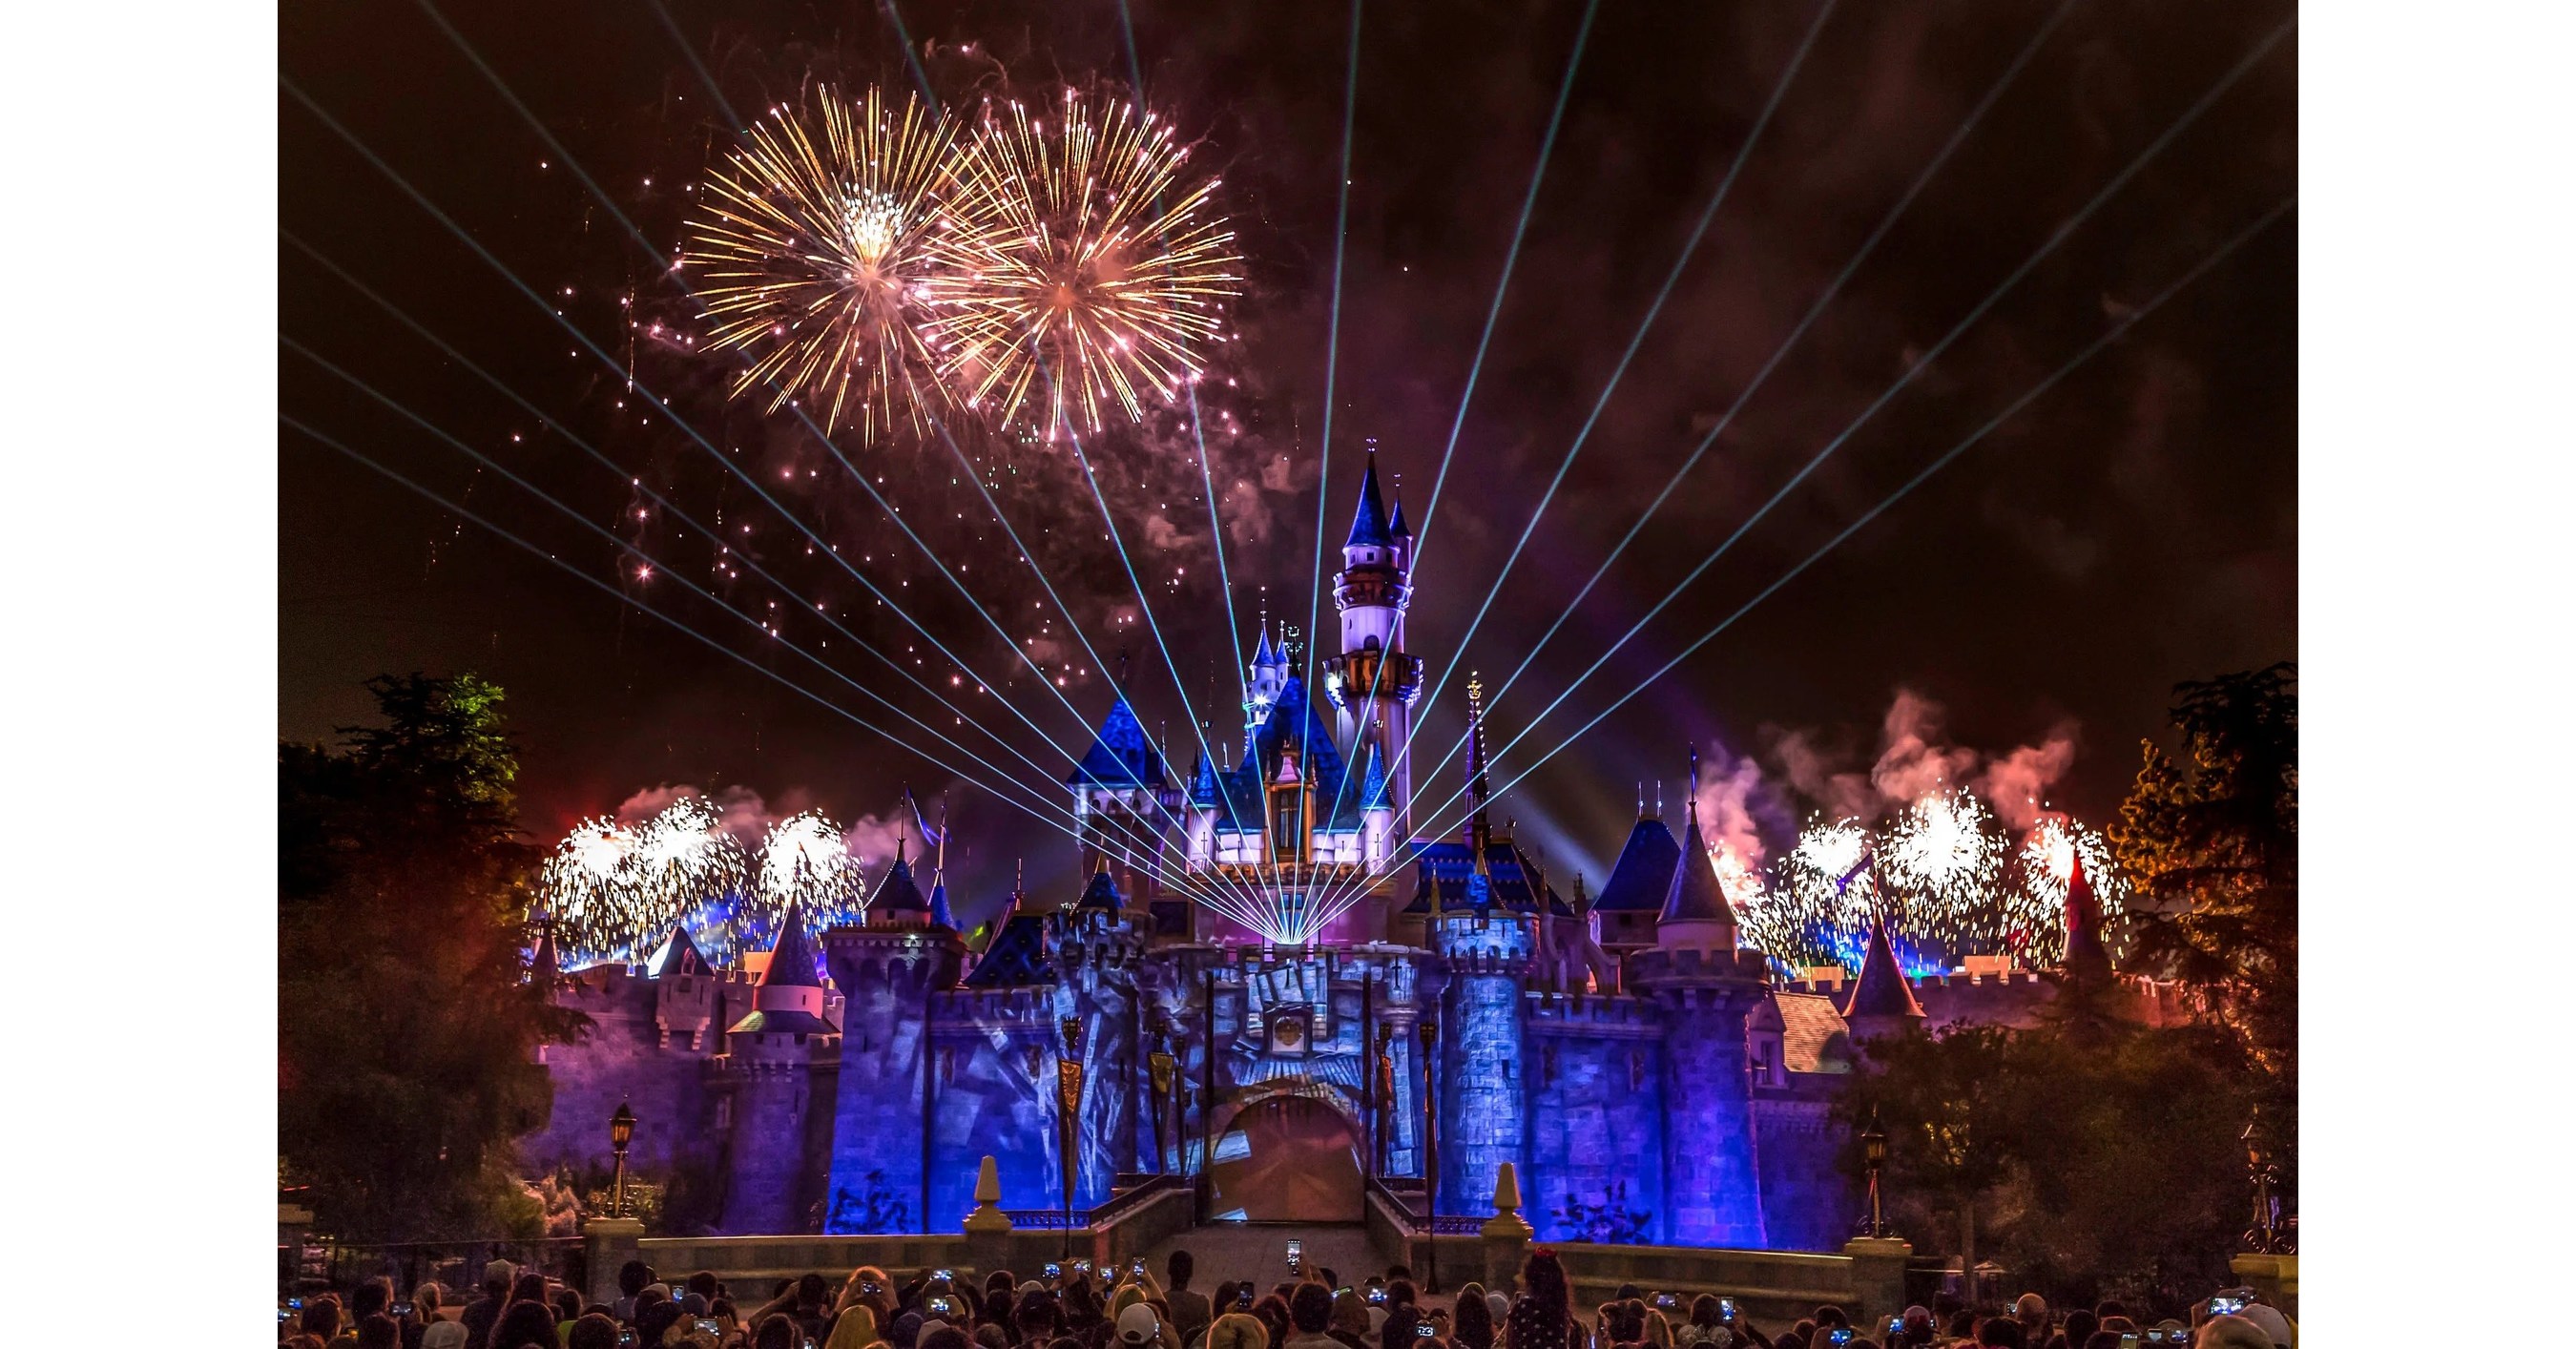 Disneyland Resort Announces a Limited-Time Summer Ticket Offer for California Residents, as Low as $83 Per Person Per Day for a 3-Day, 1-Park per Day Theme Park Ticket USA